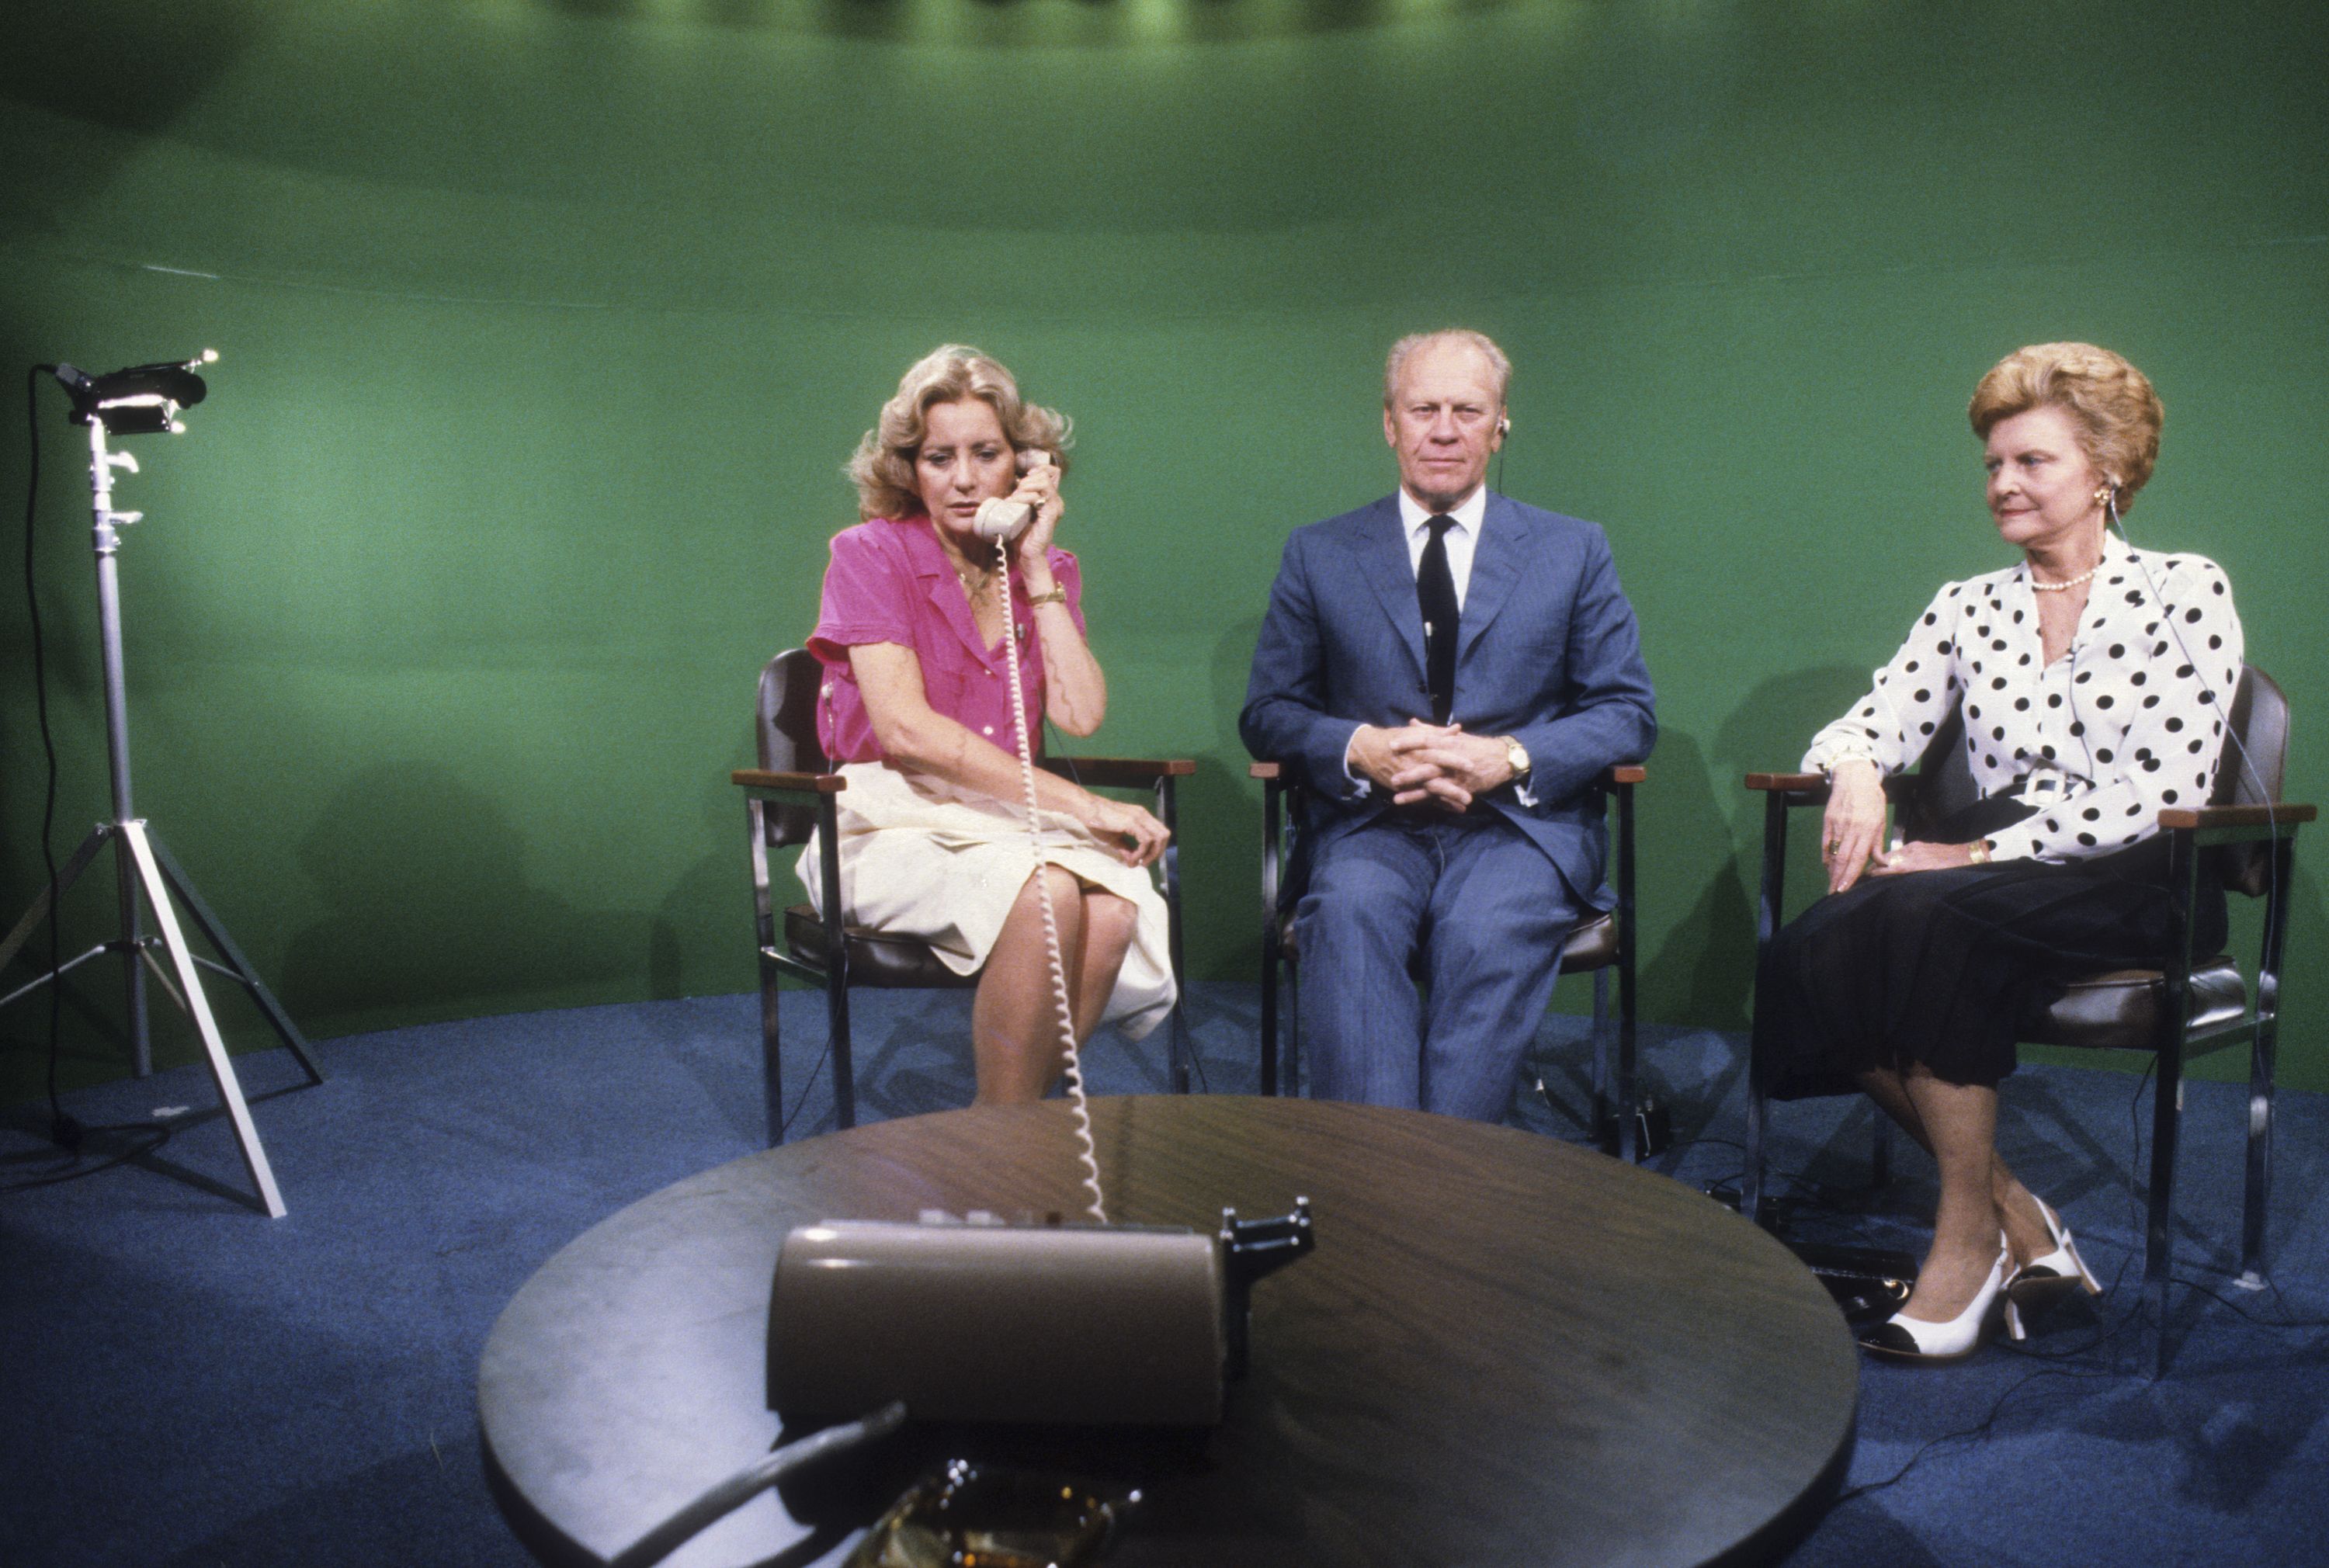 President Gerald Ford and First Lady Betty Ford on ABC News with broadcast journalist Barbara Walters.